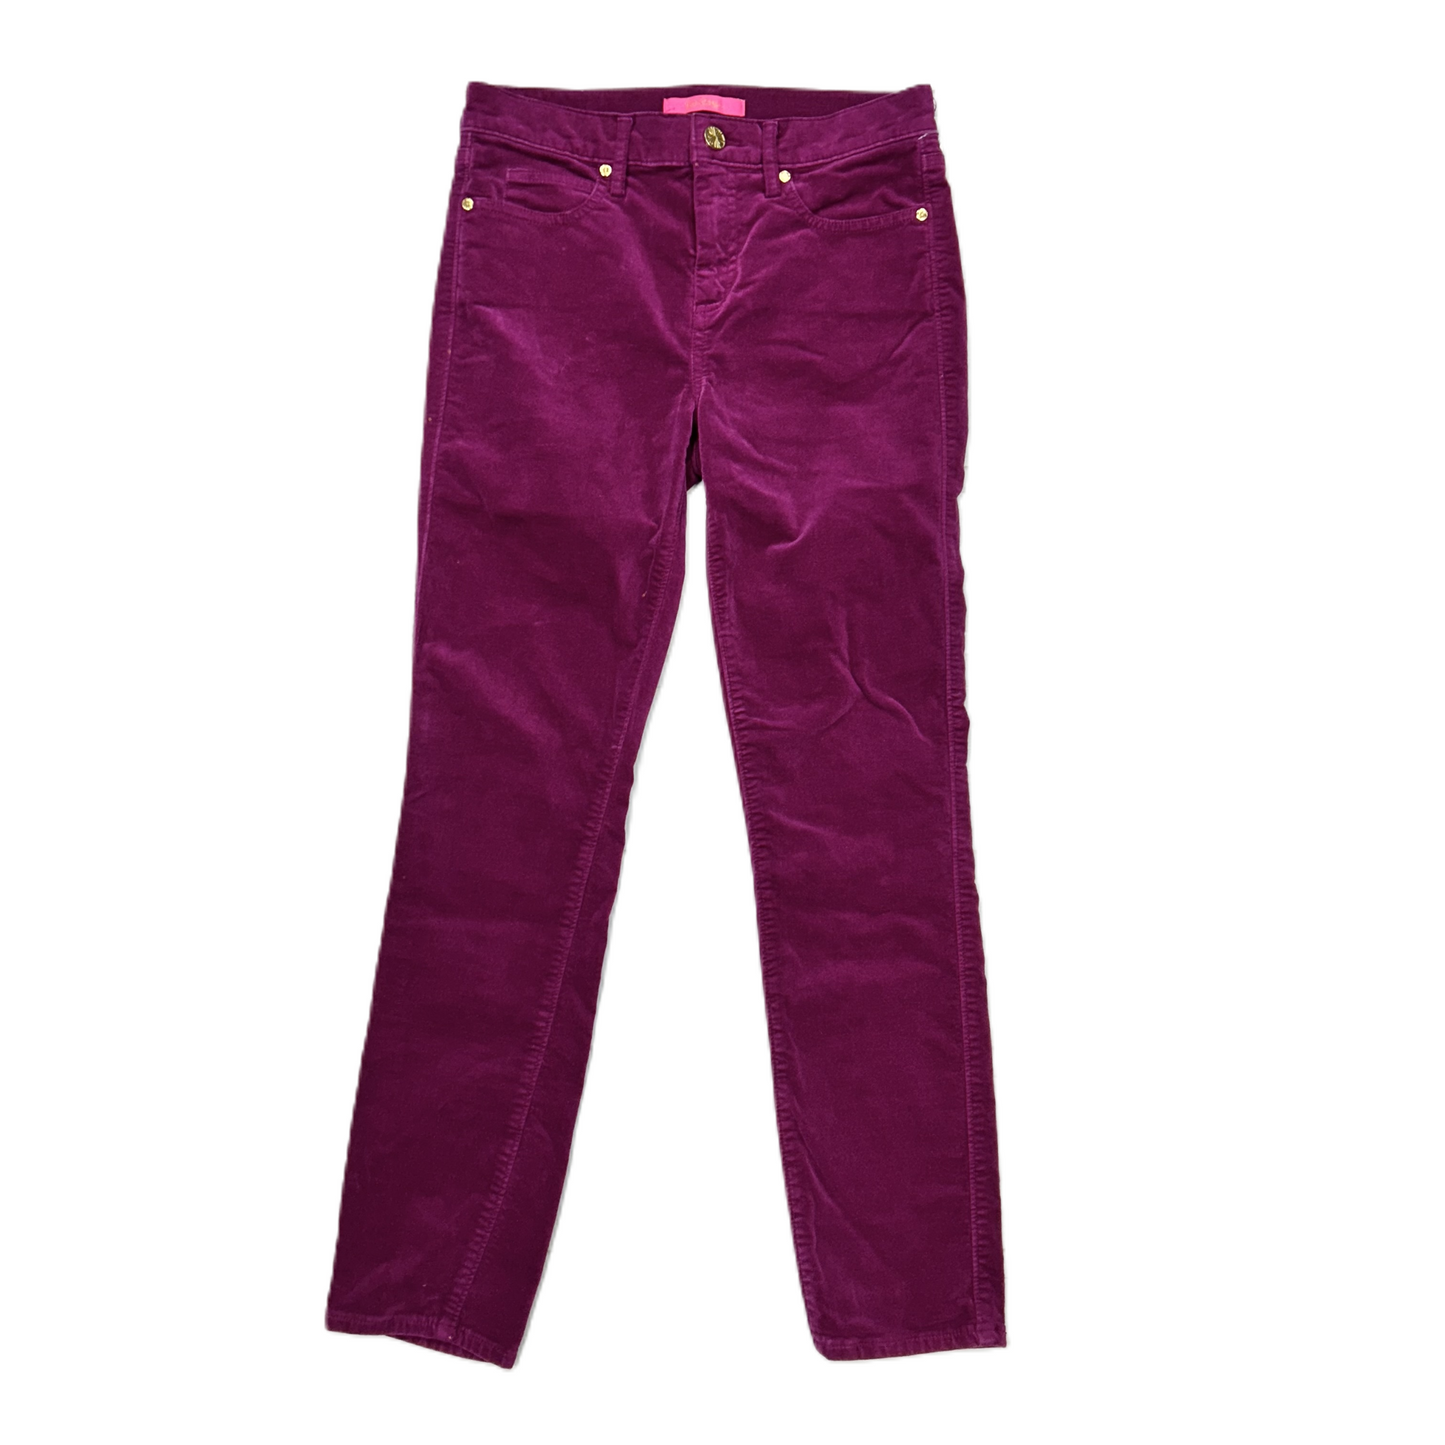 Purple Pants Designer By Lilly Pulitzer, Size: 4